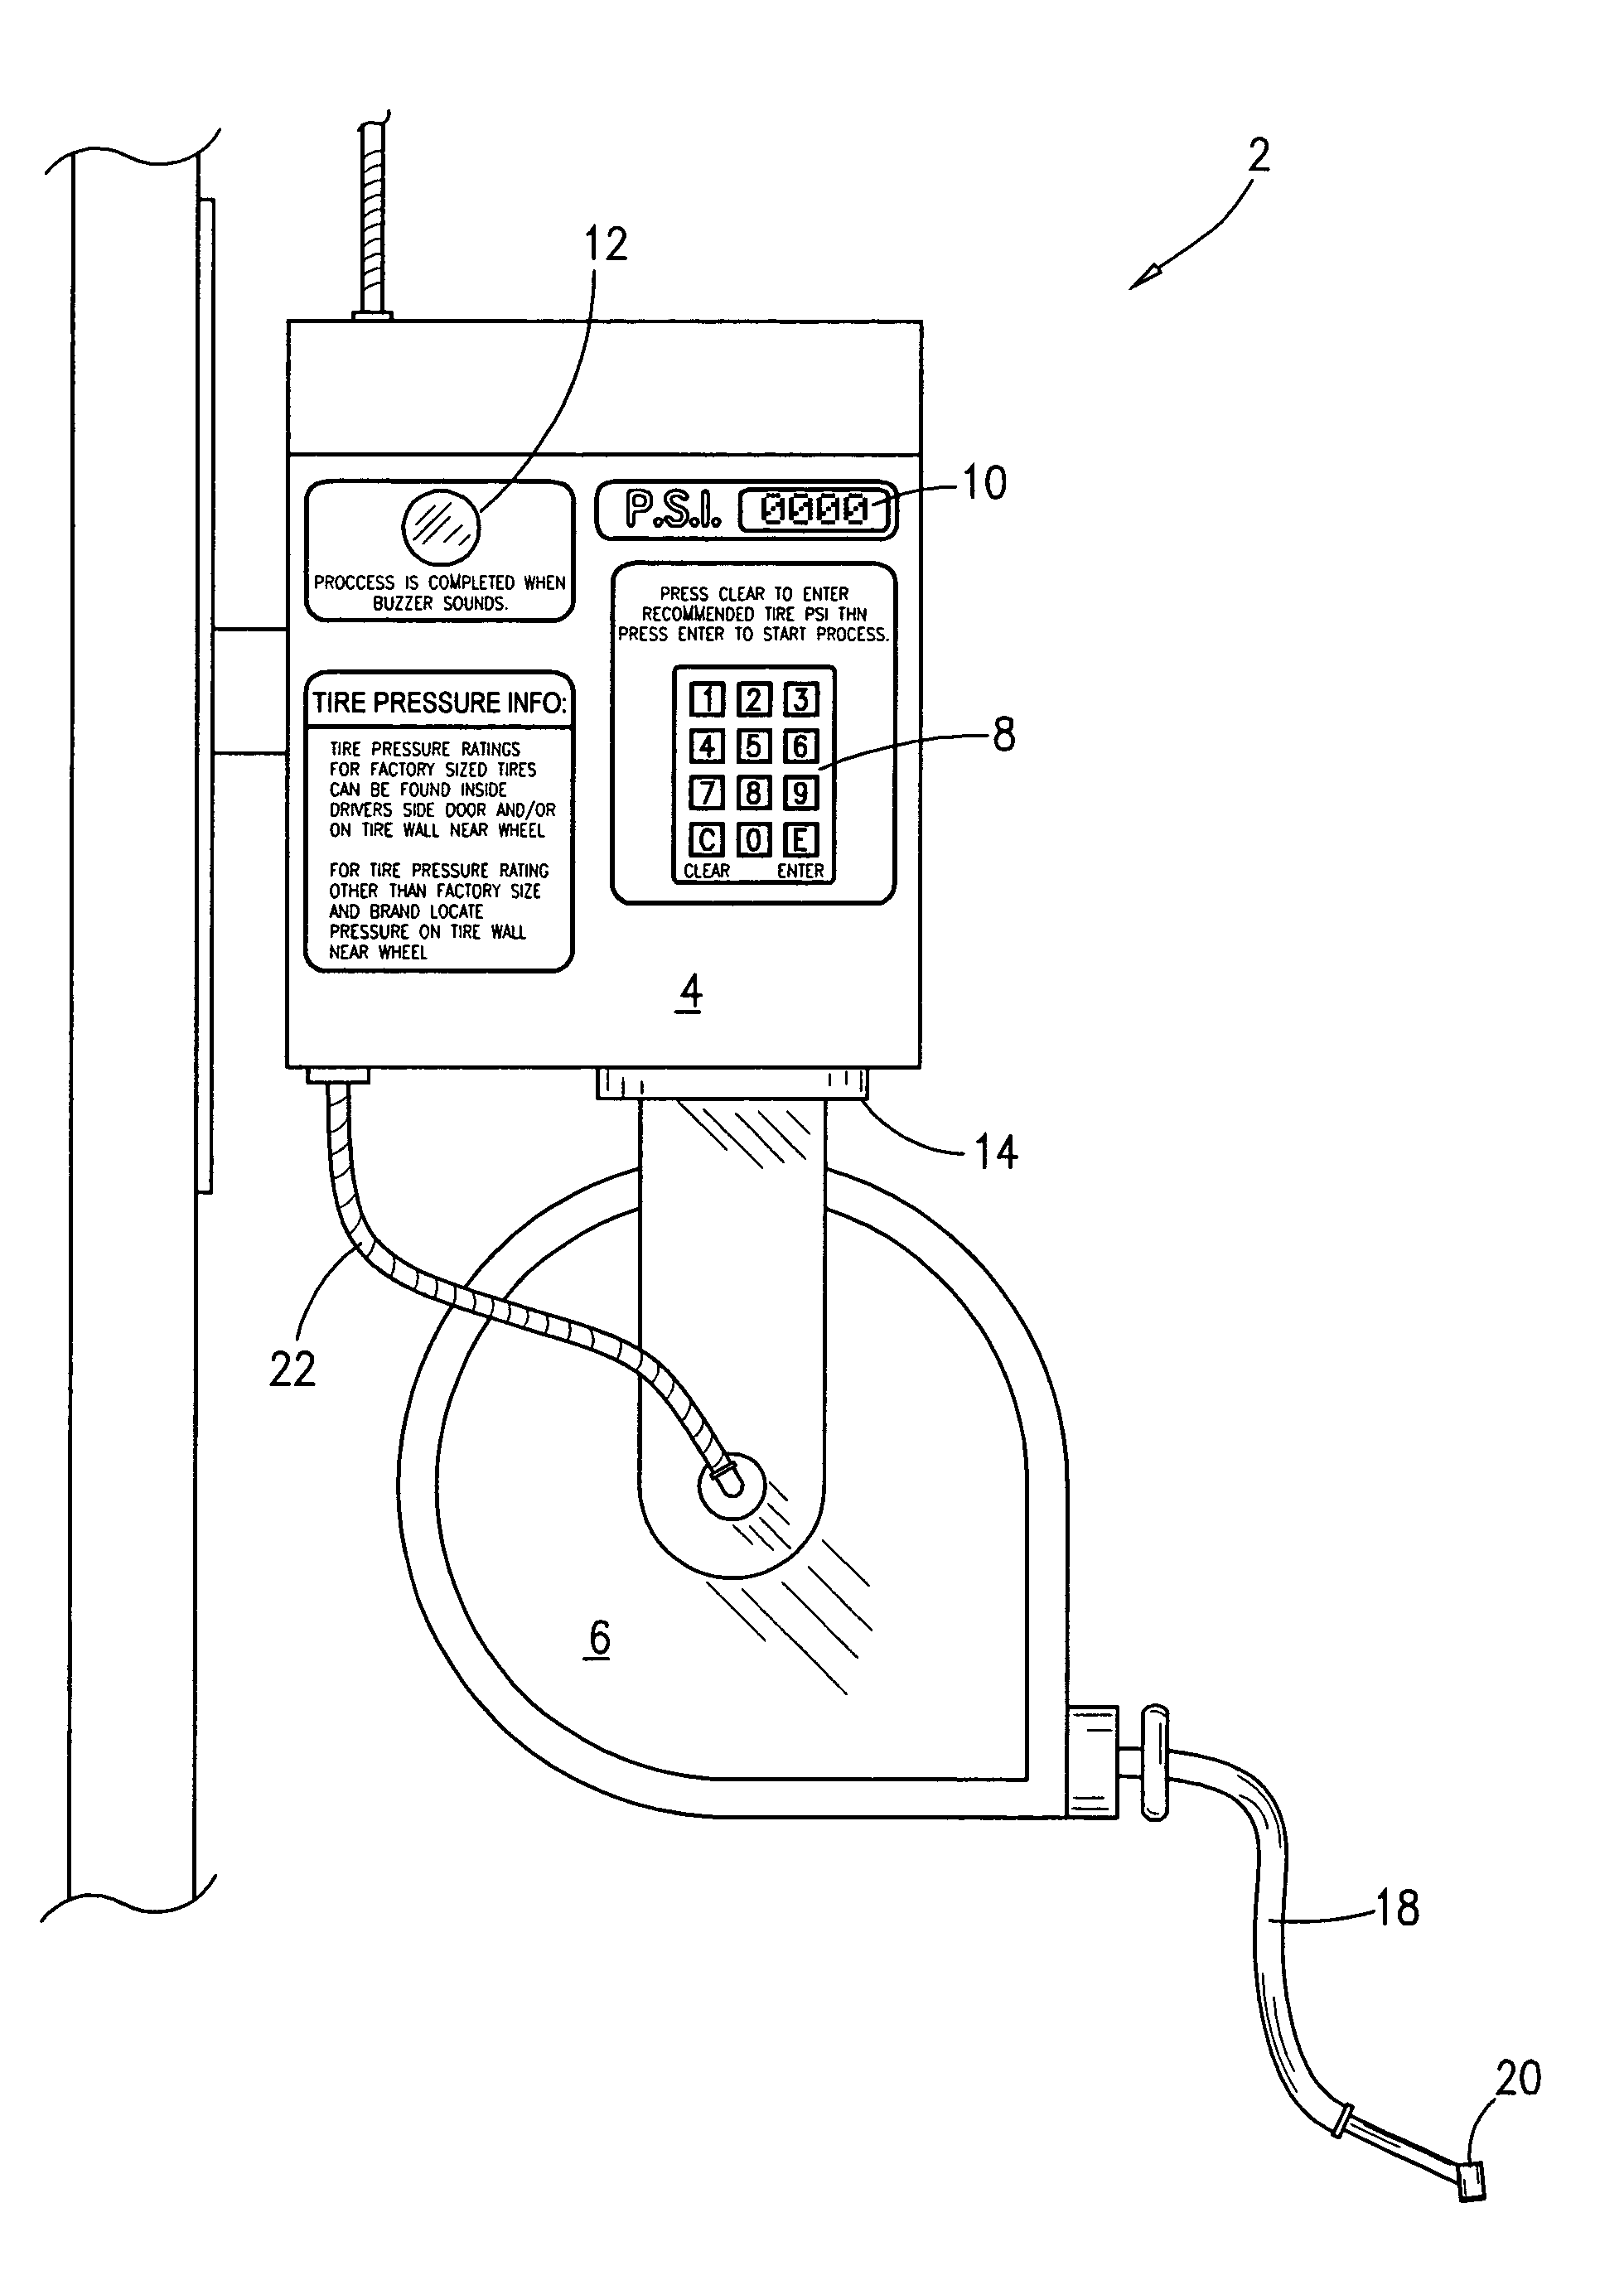 Automated apparatus and method for tire pressure maintenance